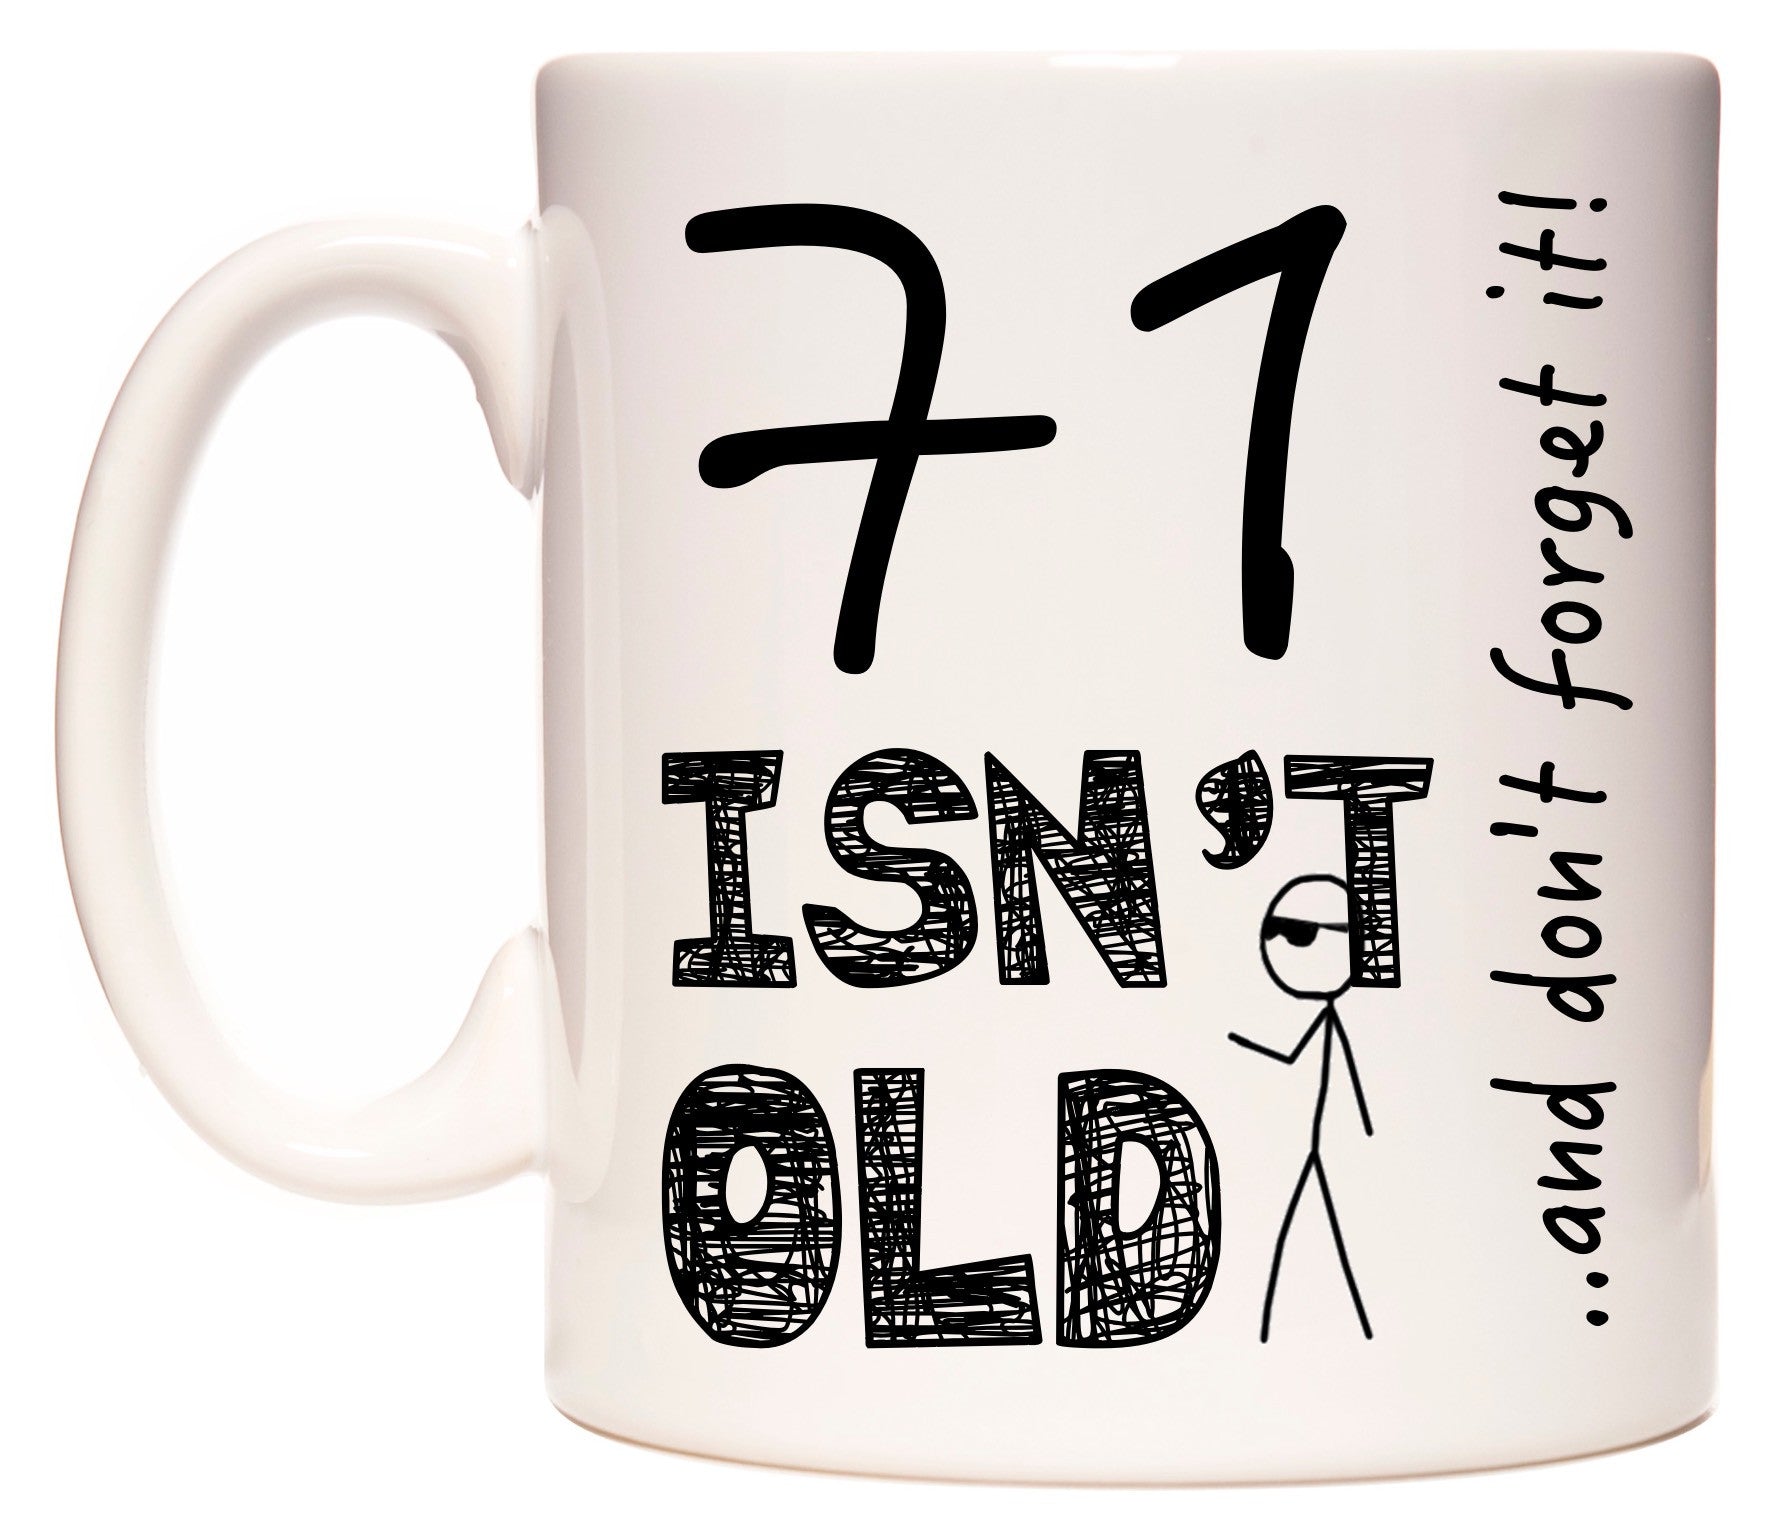 This mug features 71 Isn't Old